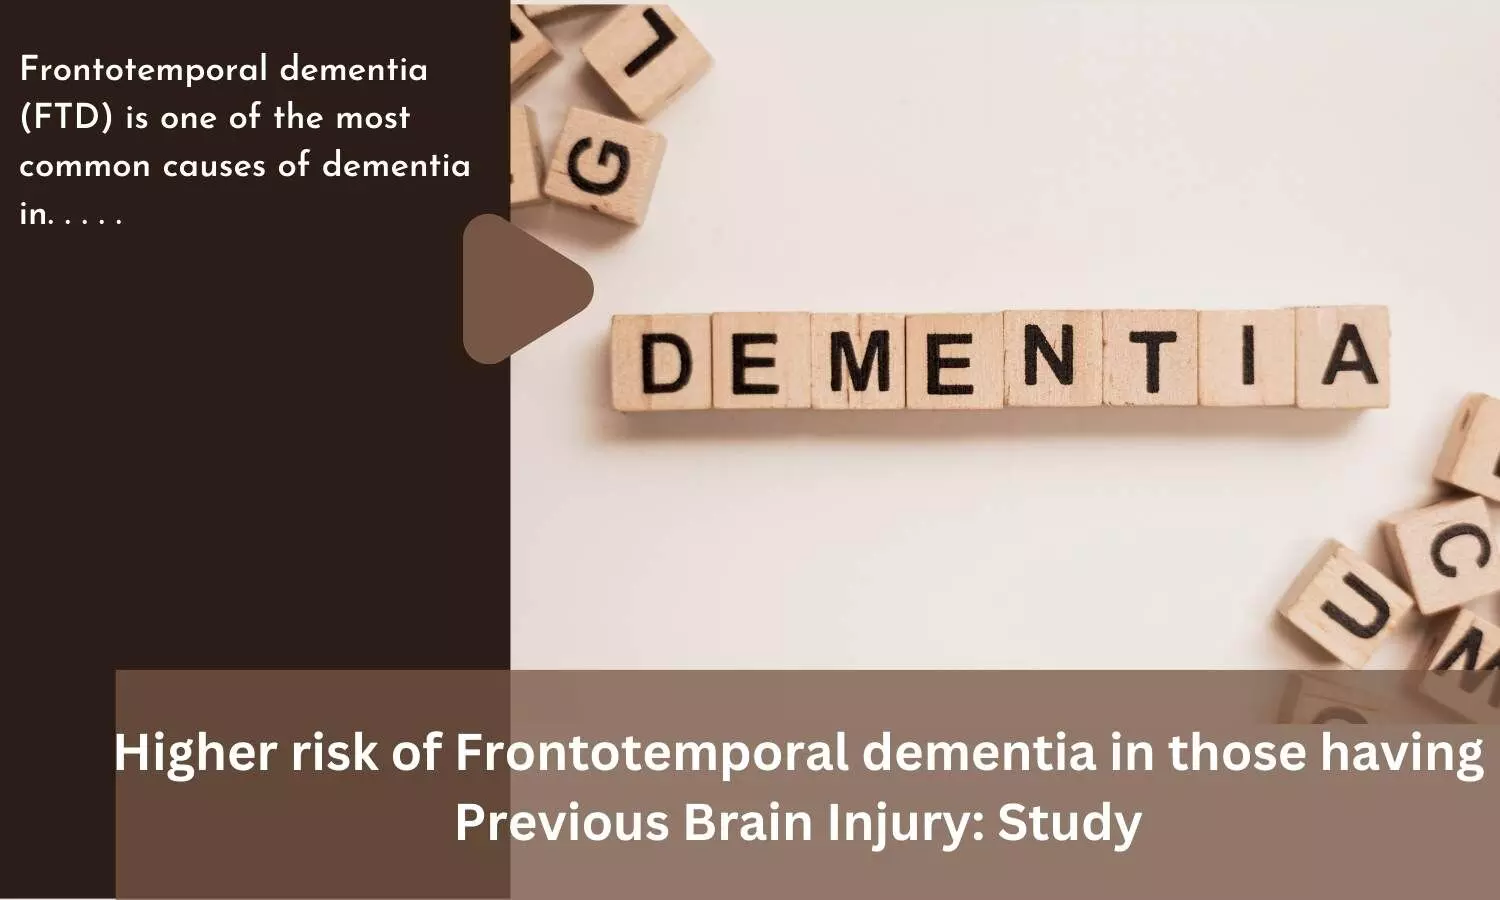 Higher risk of Frontotemporal dementia in those having Previous Brain Injury: Study